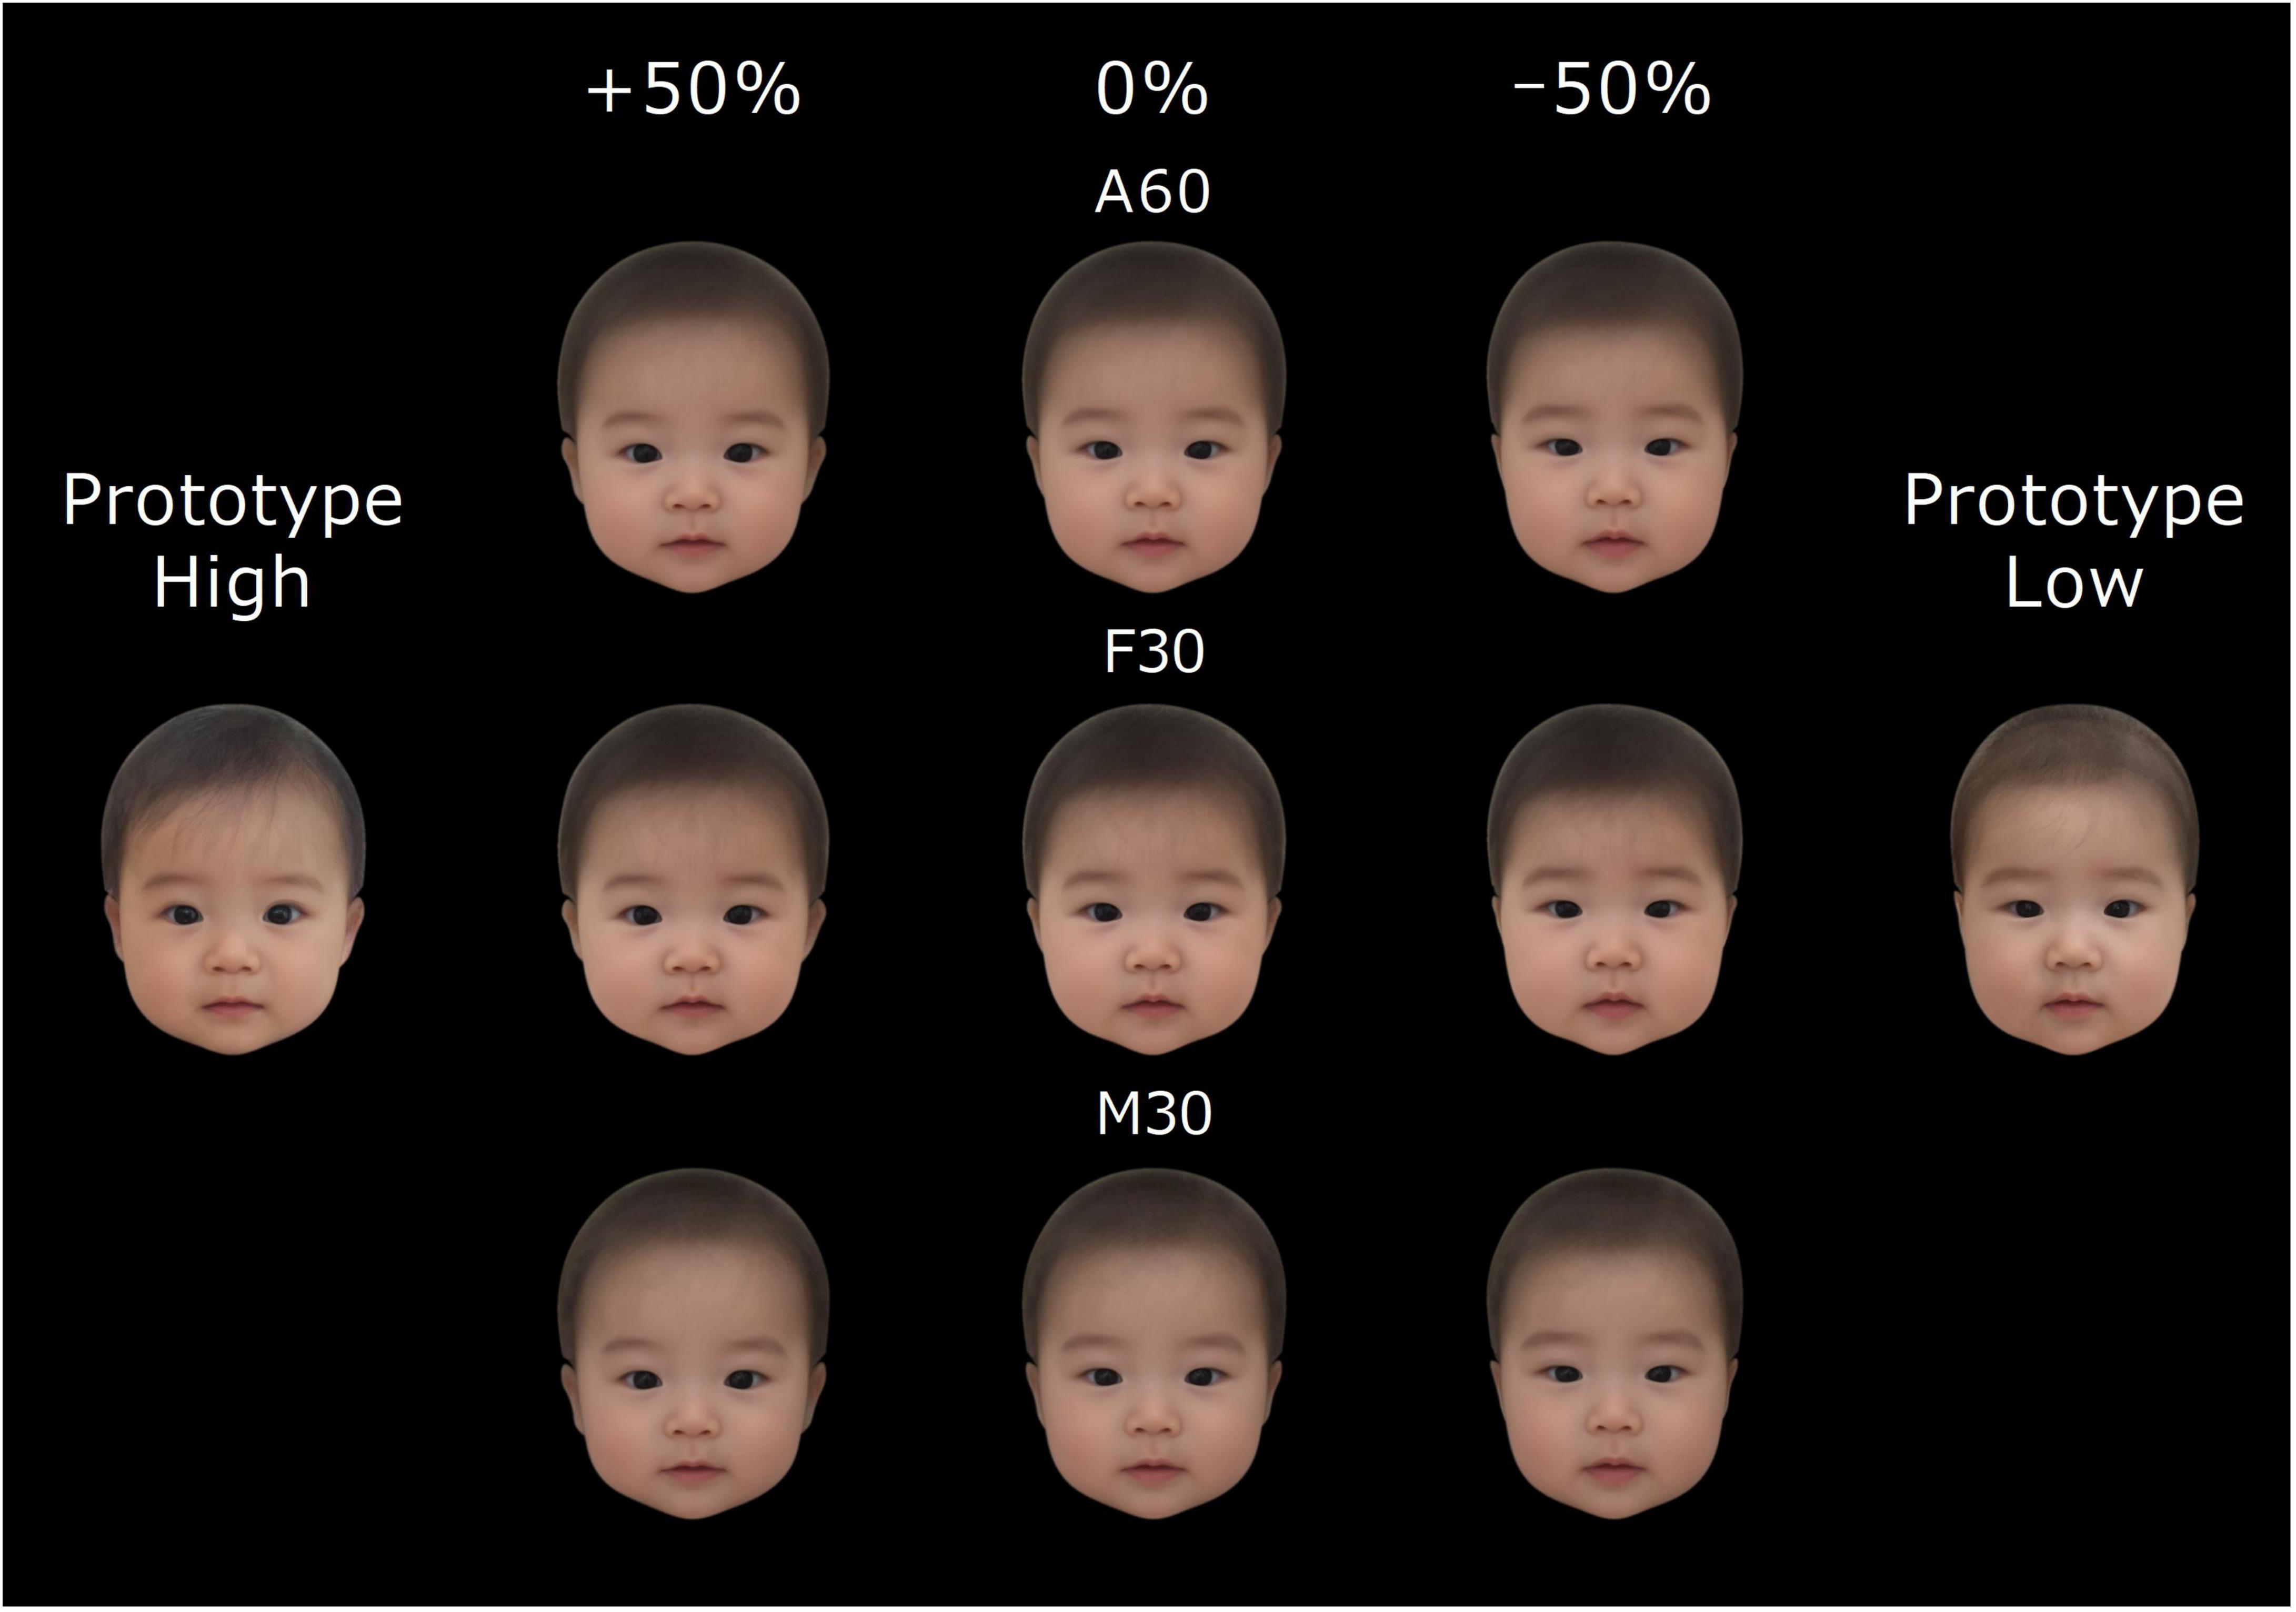 Frontiers Creation and Validation of the Japanese Cute Infant Face (JCIF) Dataset image